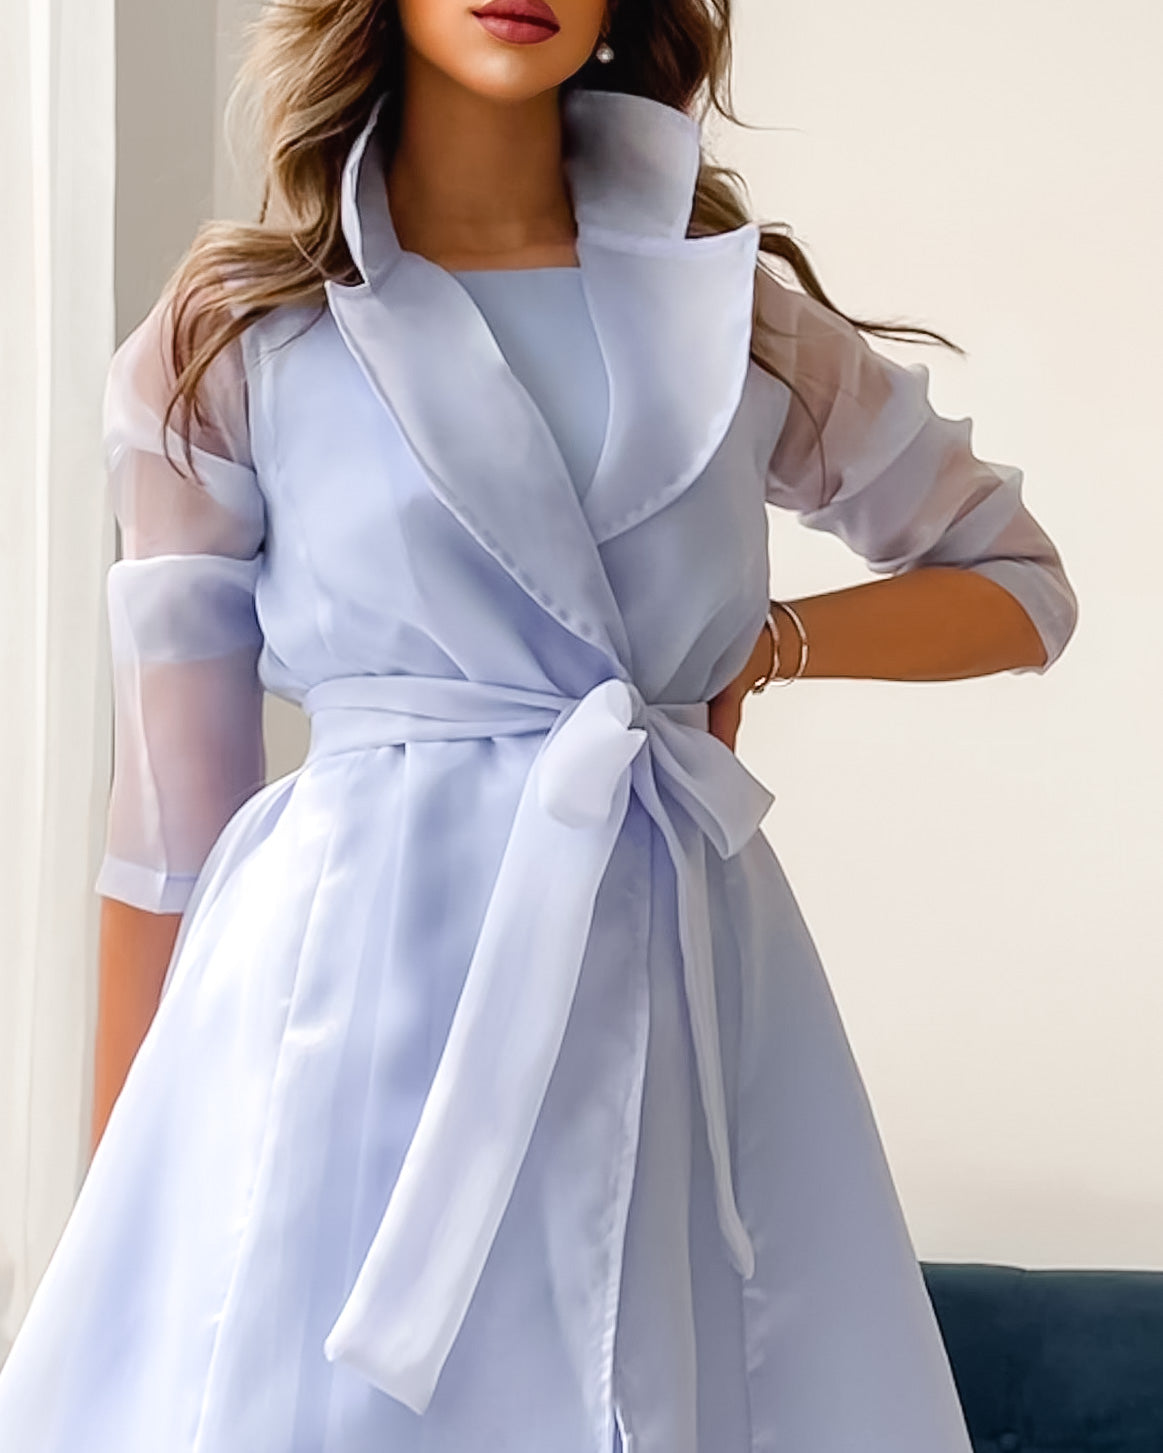 Satin dress toped with organza belted jacket in serenity blue